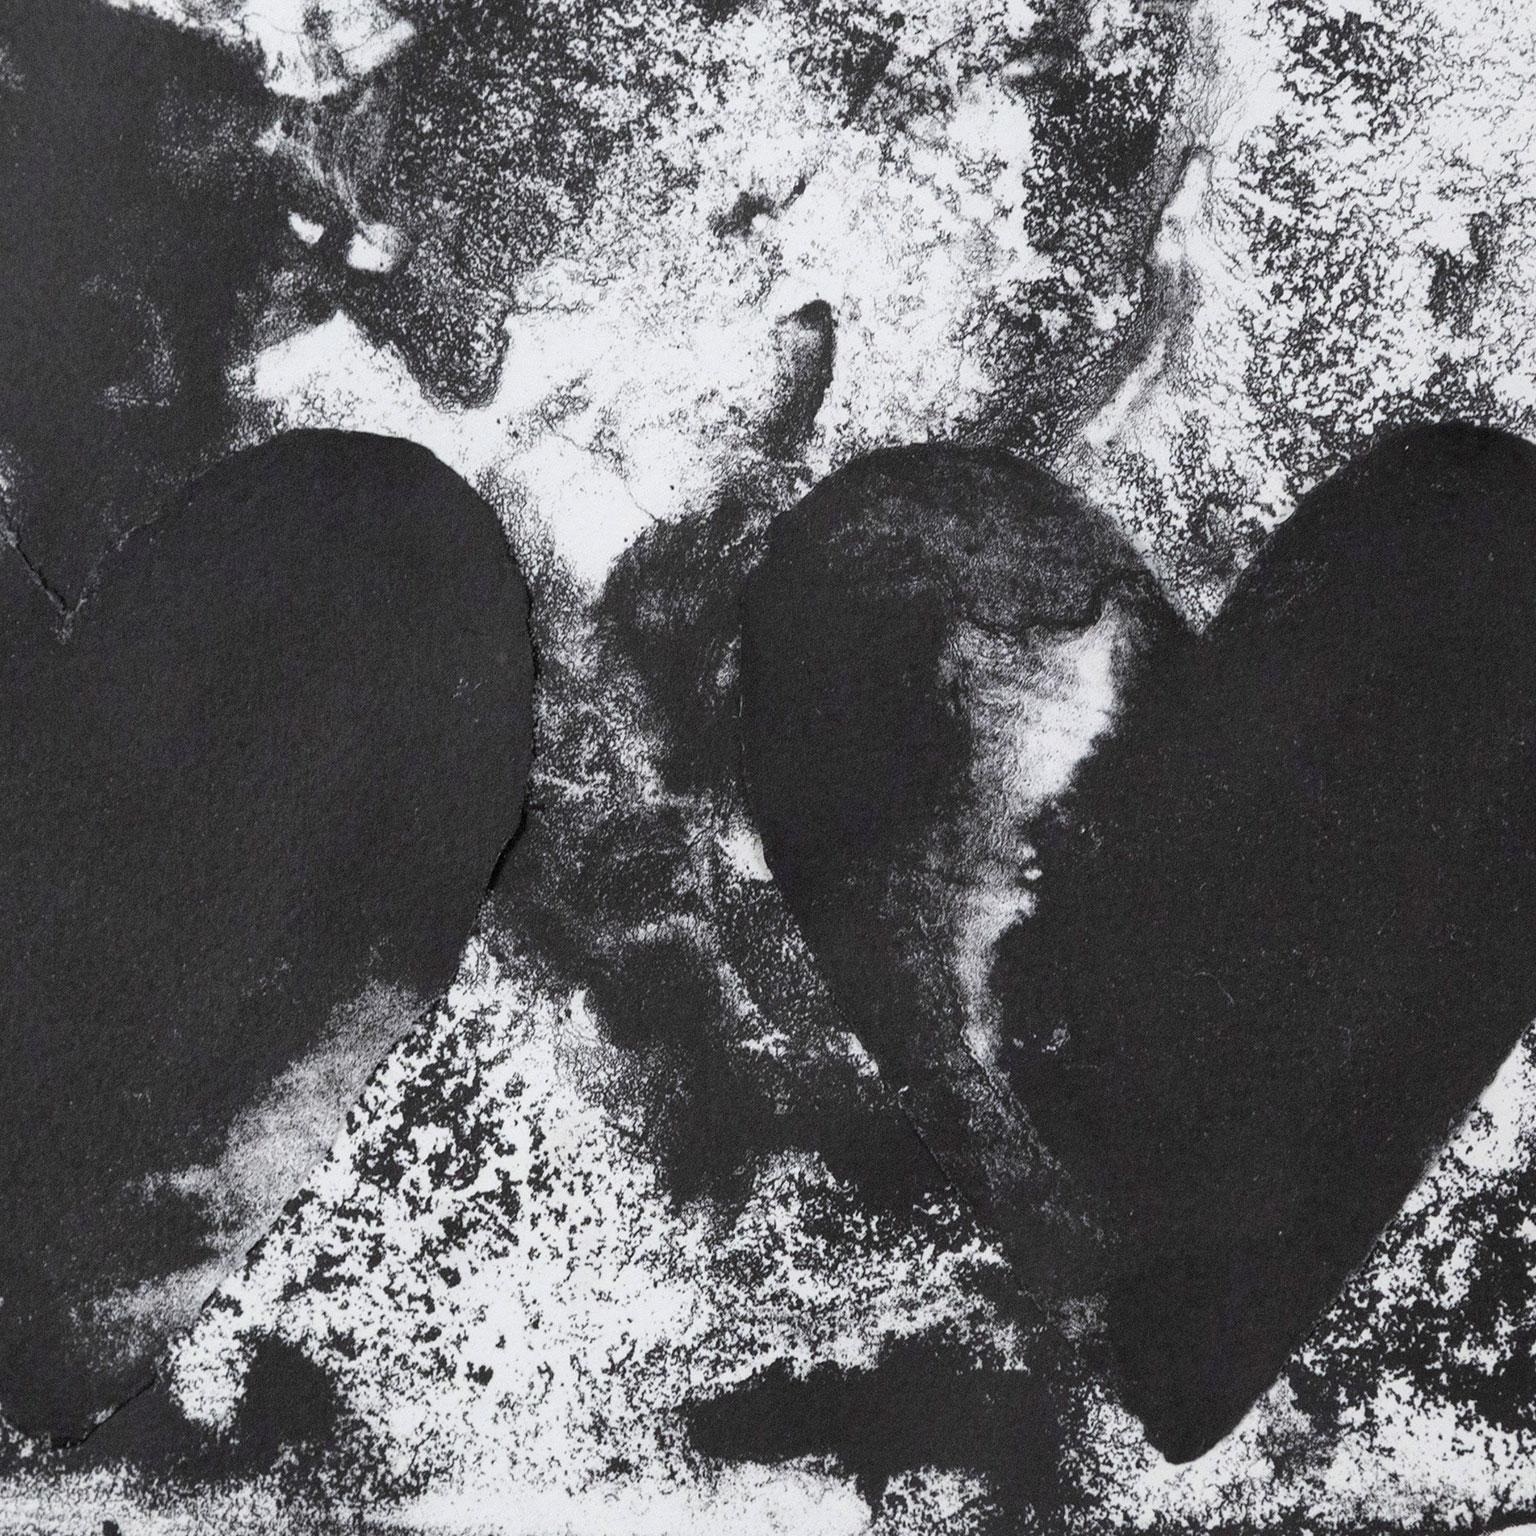 Jim Dine was one of the key artists that defined American Pop Art in the 1960s. 

Like Jasper Johns and Andy Warhol, Dine appropriated quintessential American images and icons. 

He used ubiquitous and familiar forms, like tools, food, and stylized